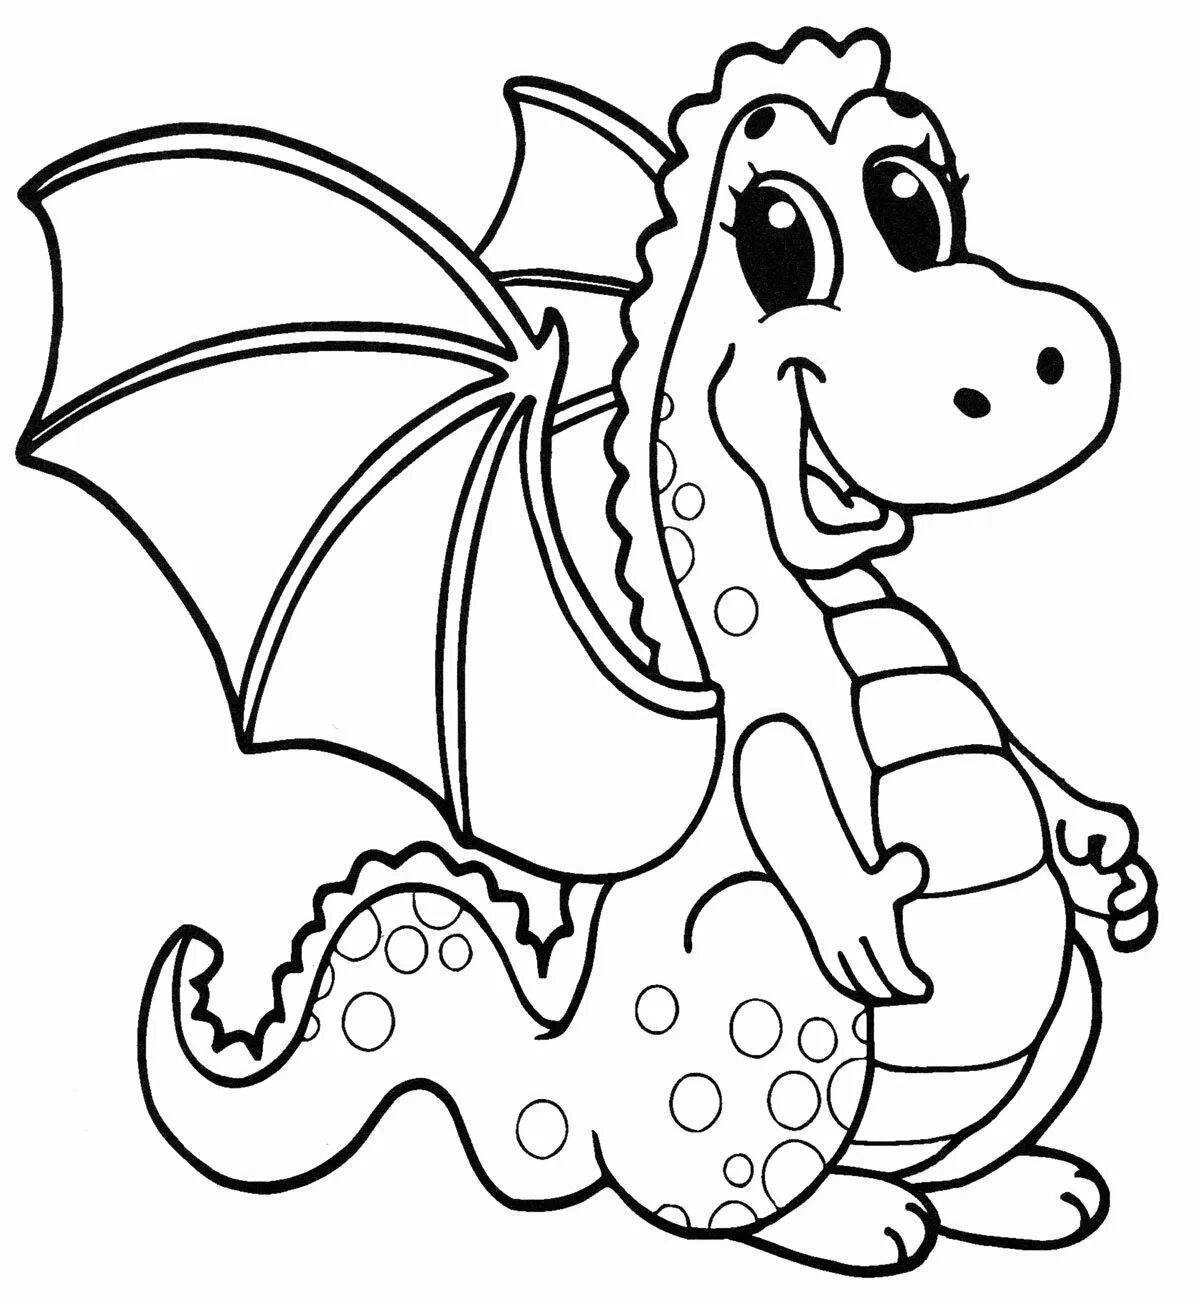 Exotic coloring dragons for children 6-7 years old